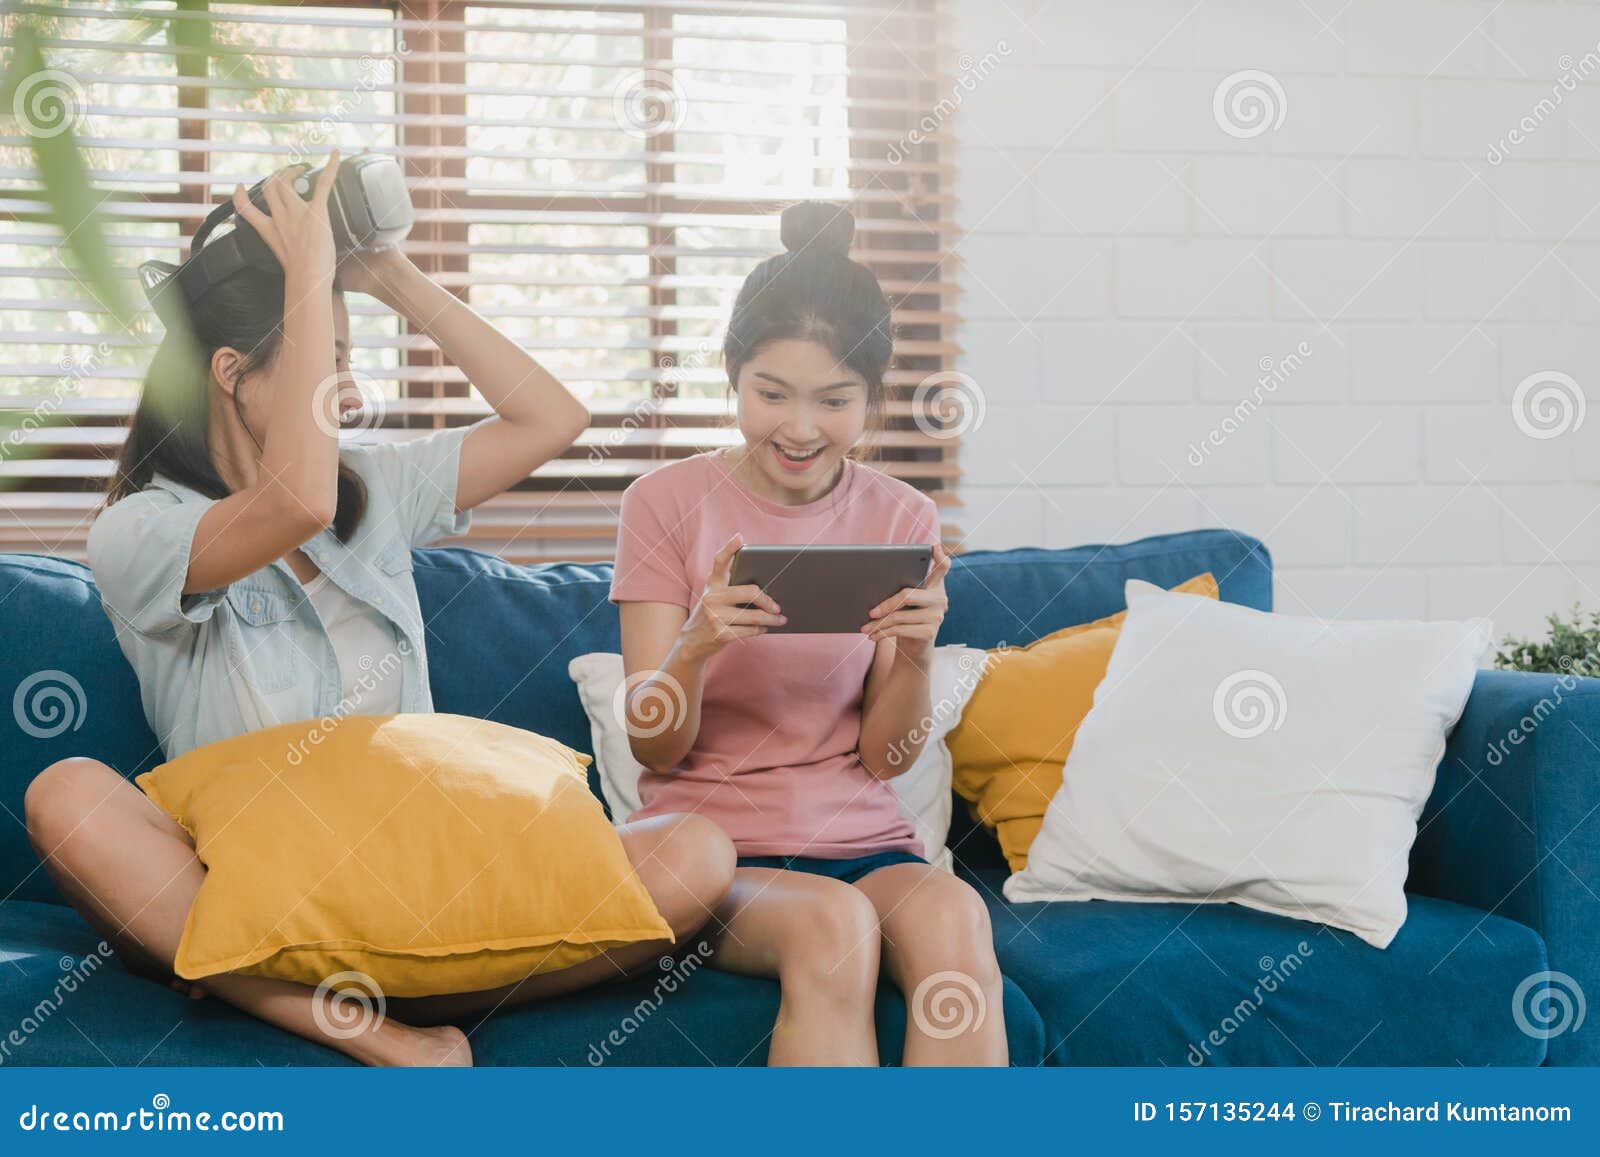 Young Lesbian Lgbtq Asian Women Couple Using Tablet At Home Asian